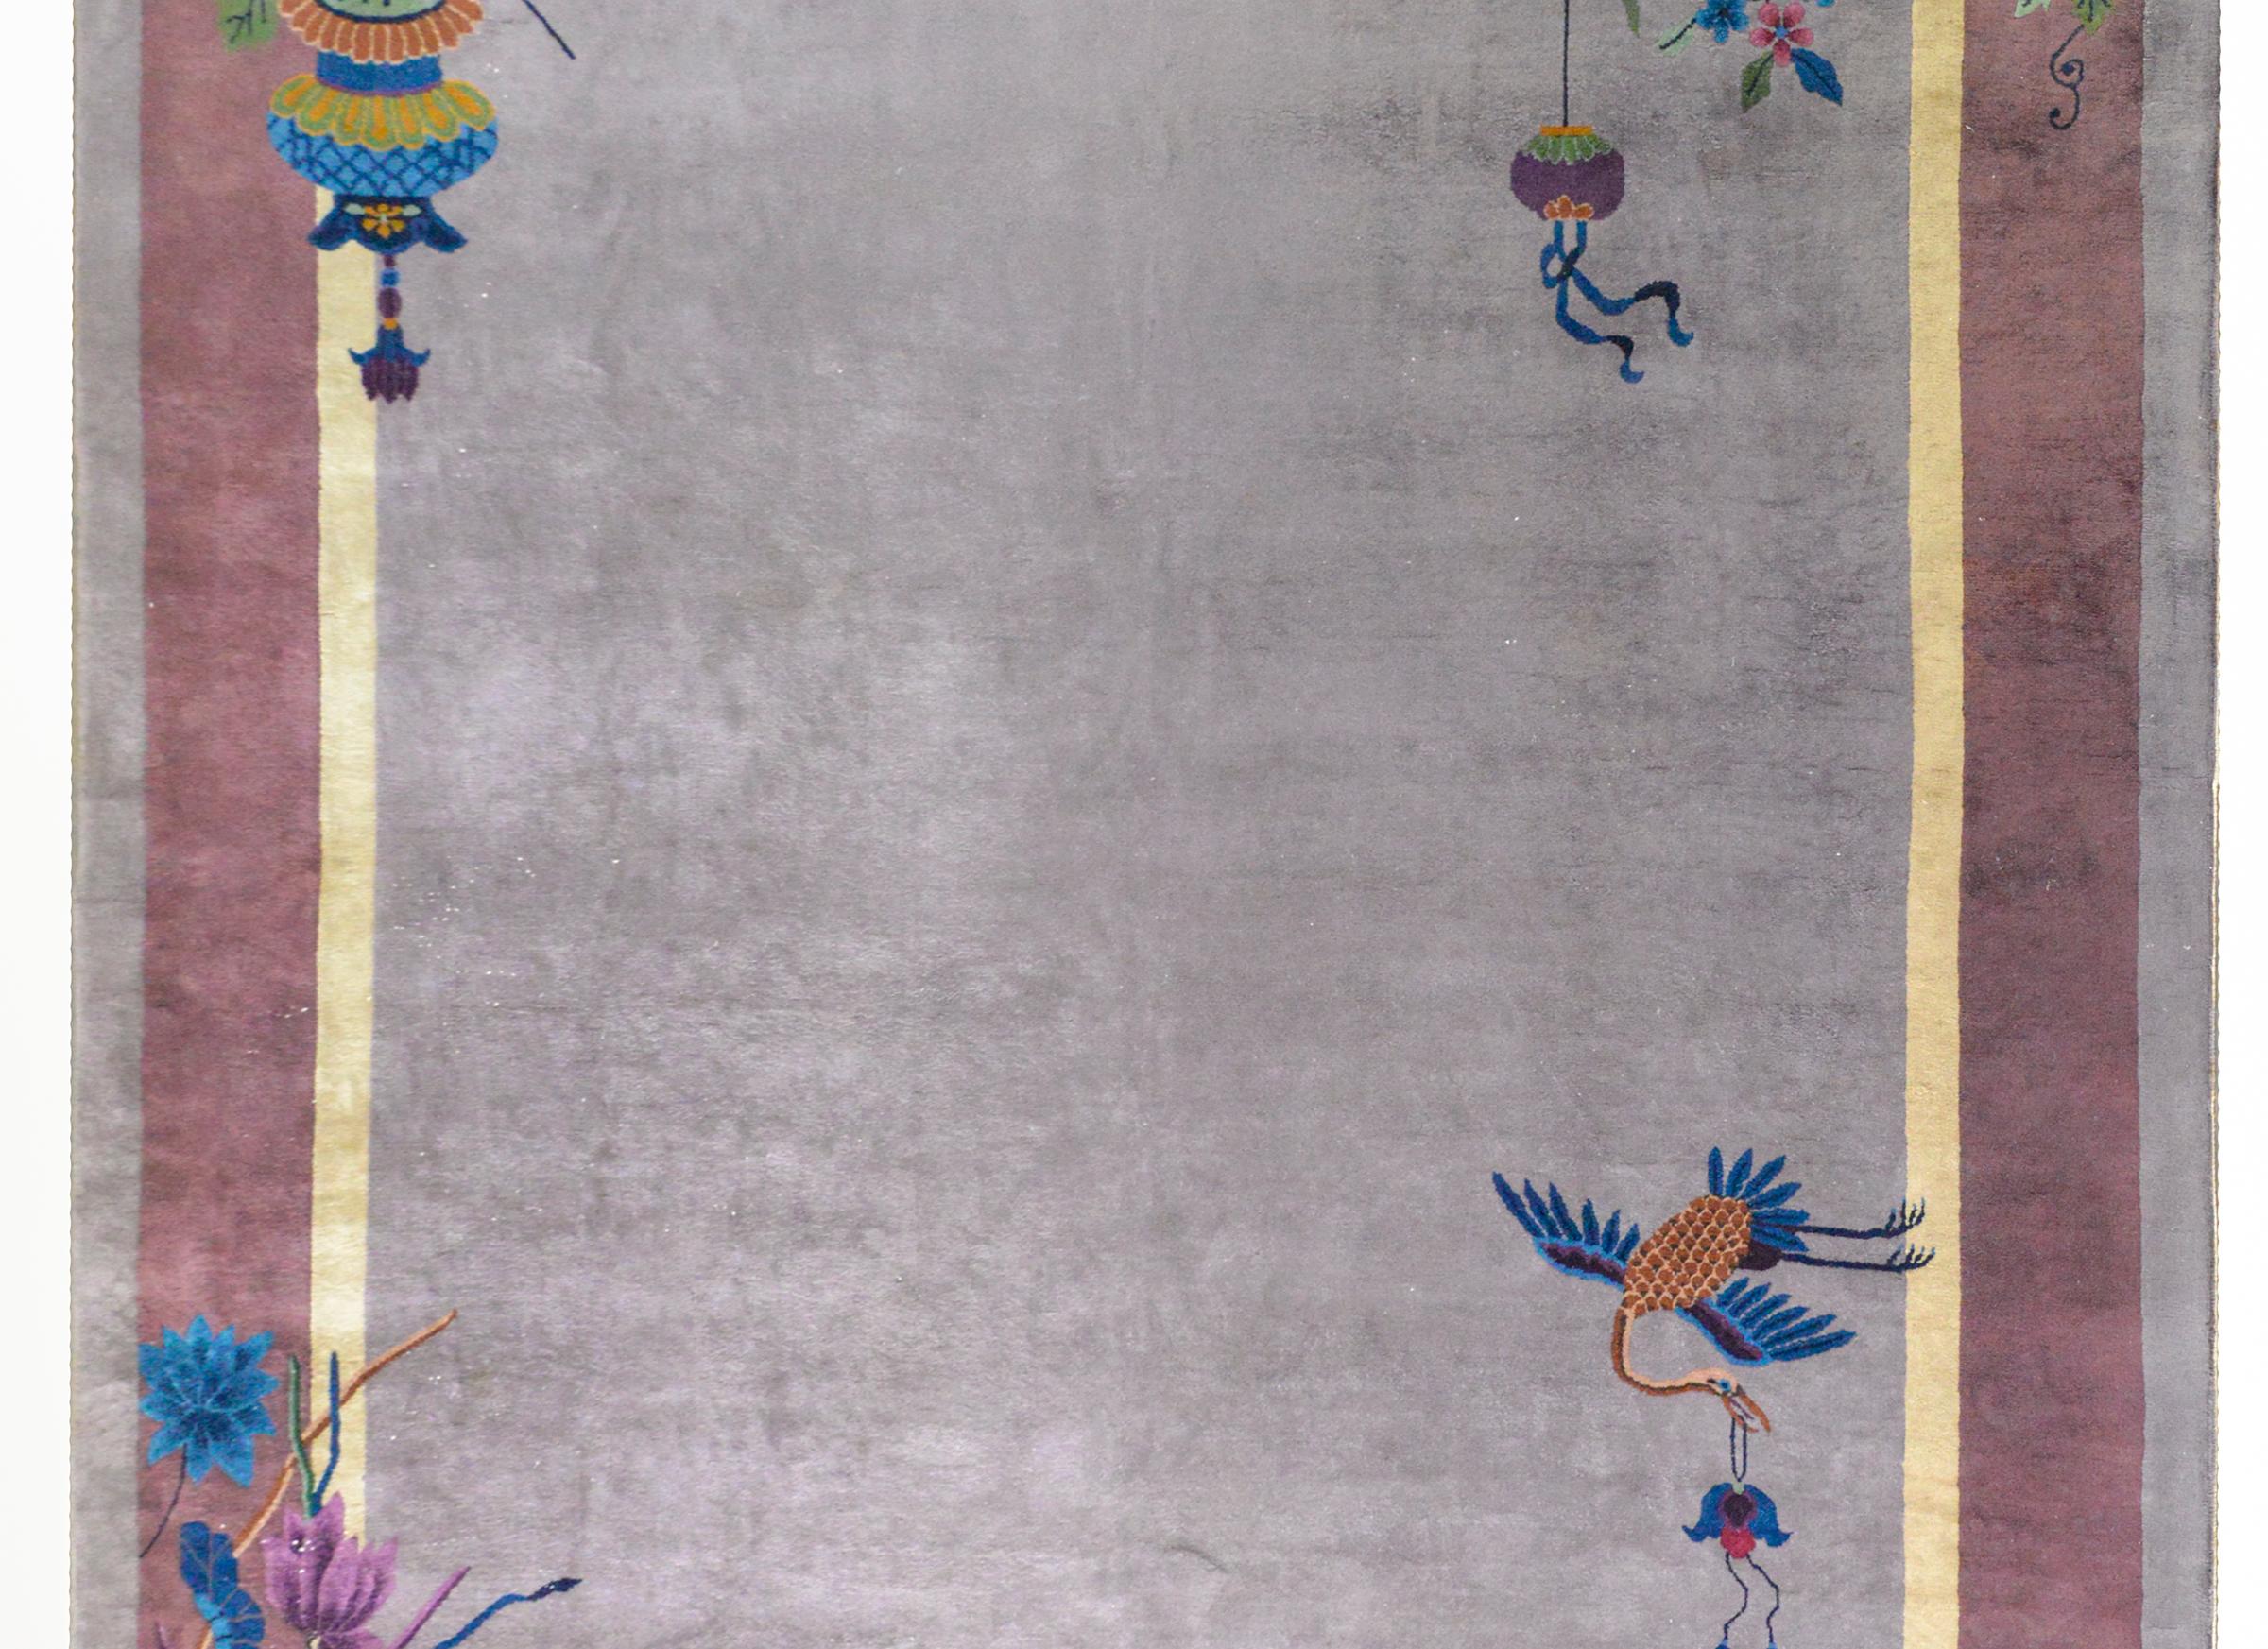 A gorgeous early 20th century Chinese Art Deco rug with a gray field surrounded by a pale yellow, lavender, and gray border overlaid with multi-colored auspicious flowers including peonies, chrysanthemum, lotus, and cherry blossoms, and with a crane